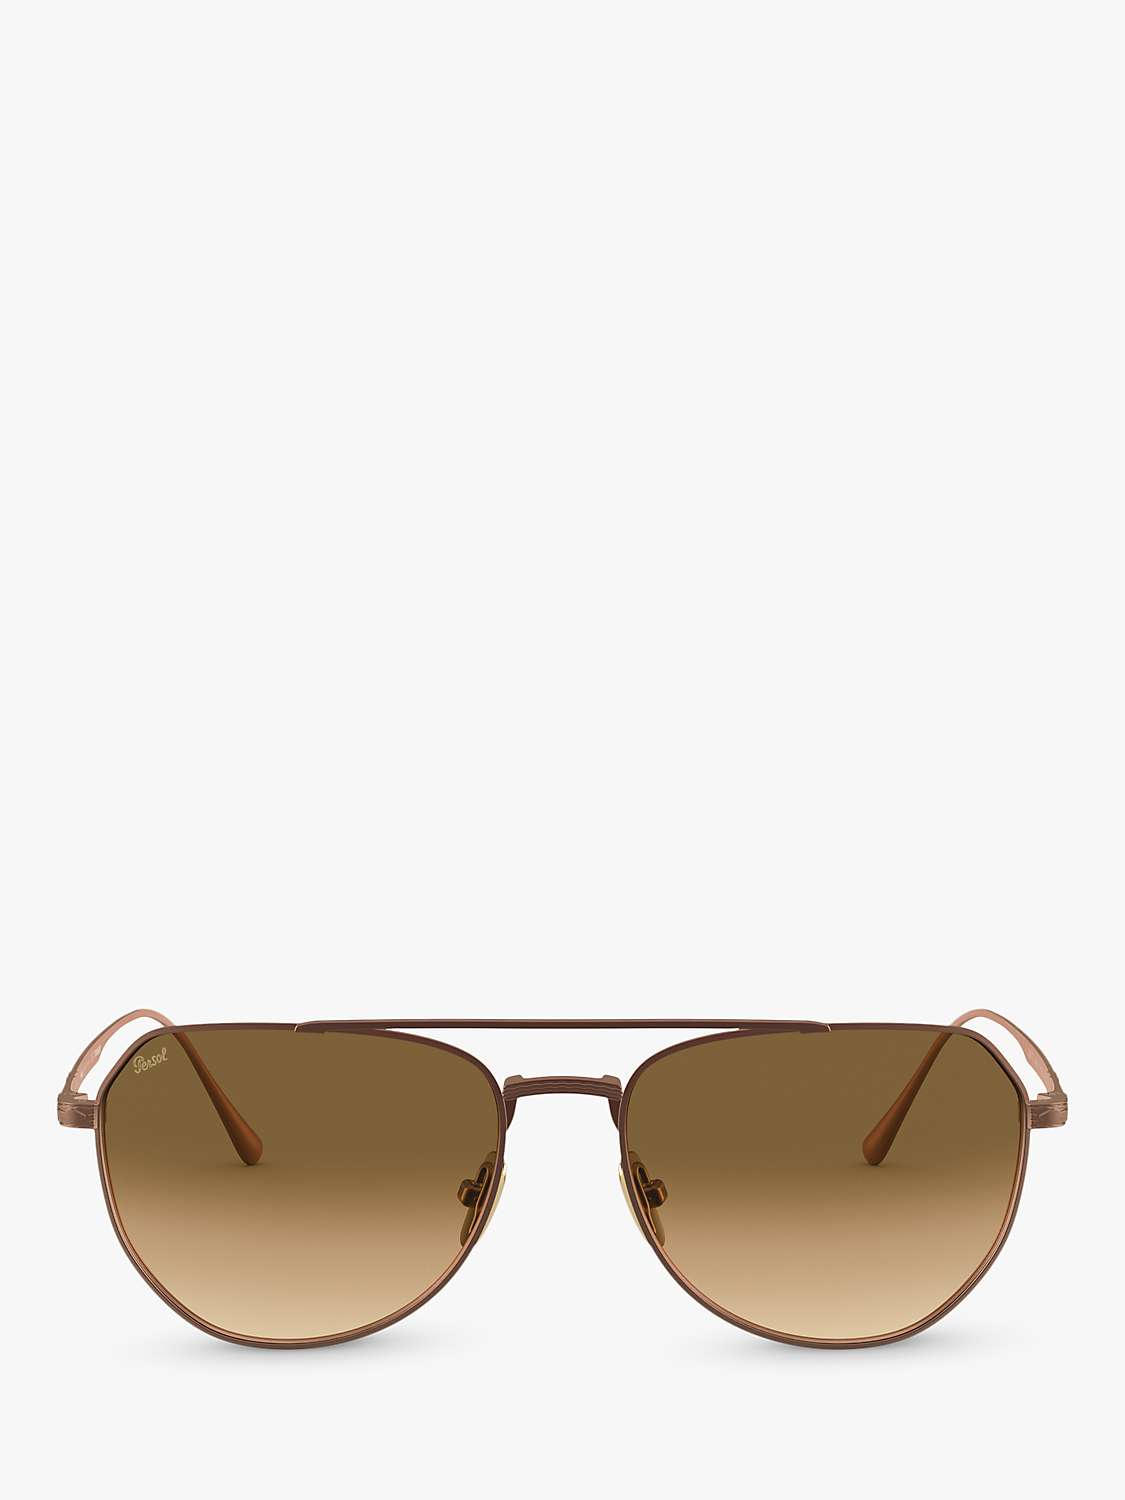 Buy Persol PO5003ST Unisex Oval Sunglasses Online at johnlewis.com